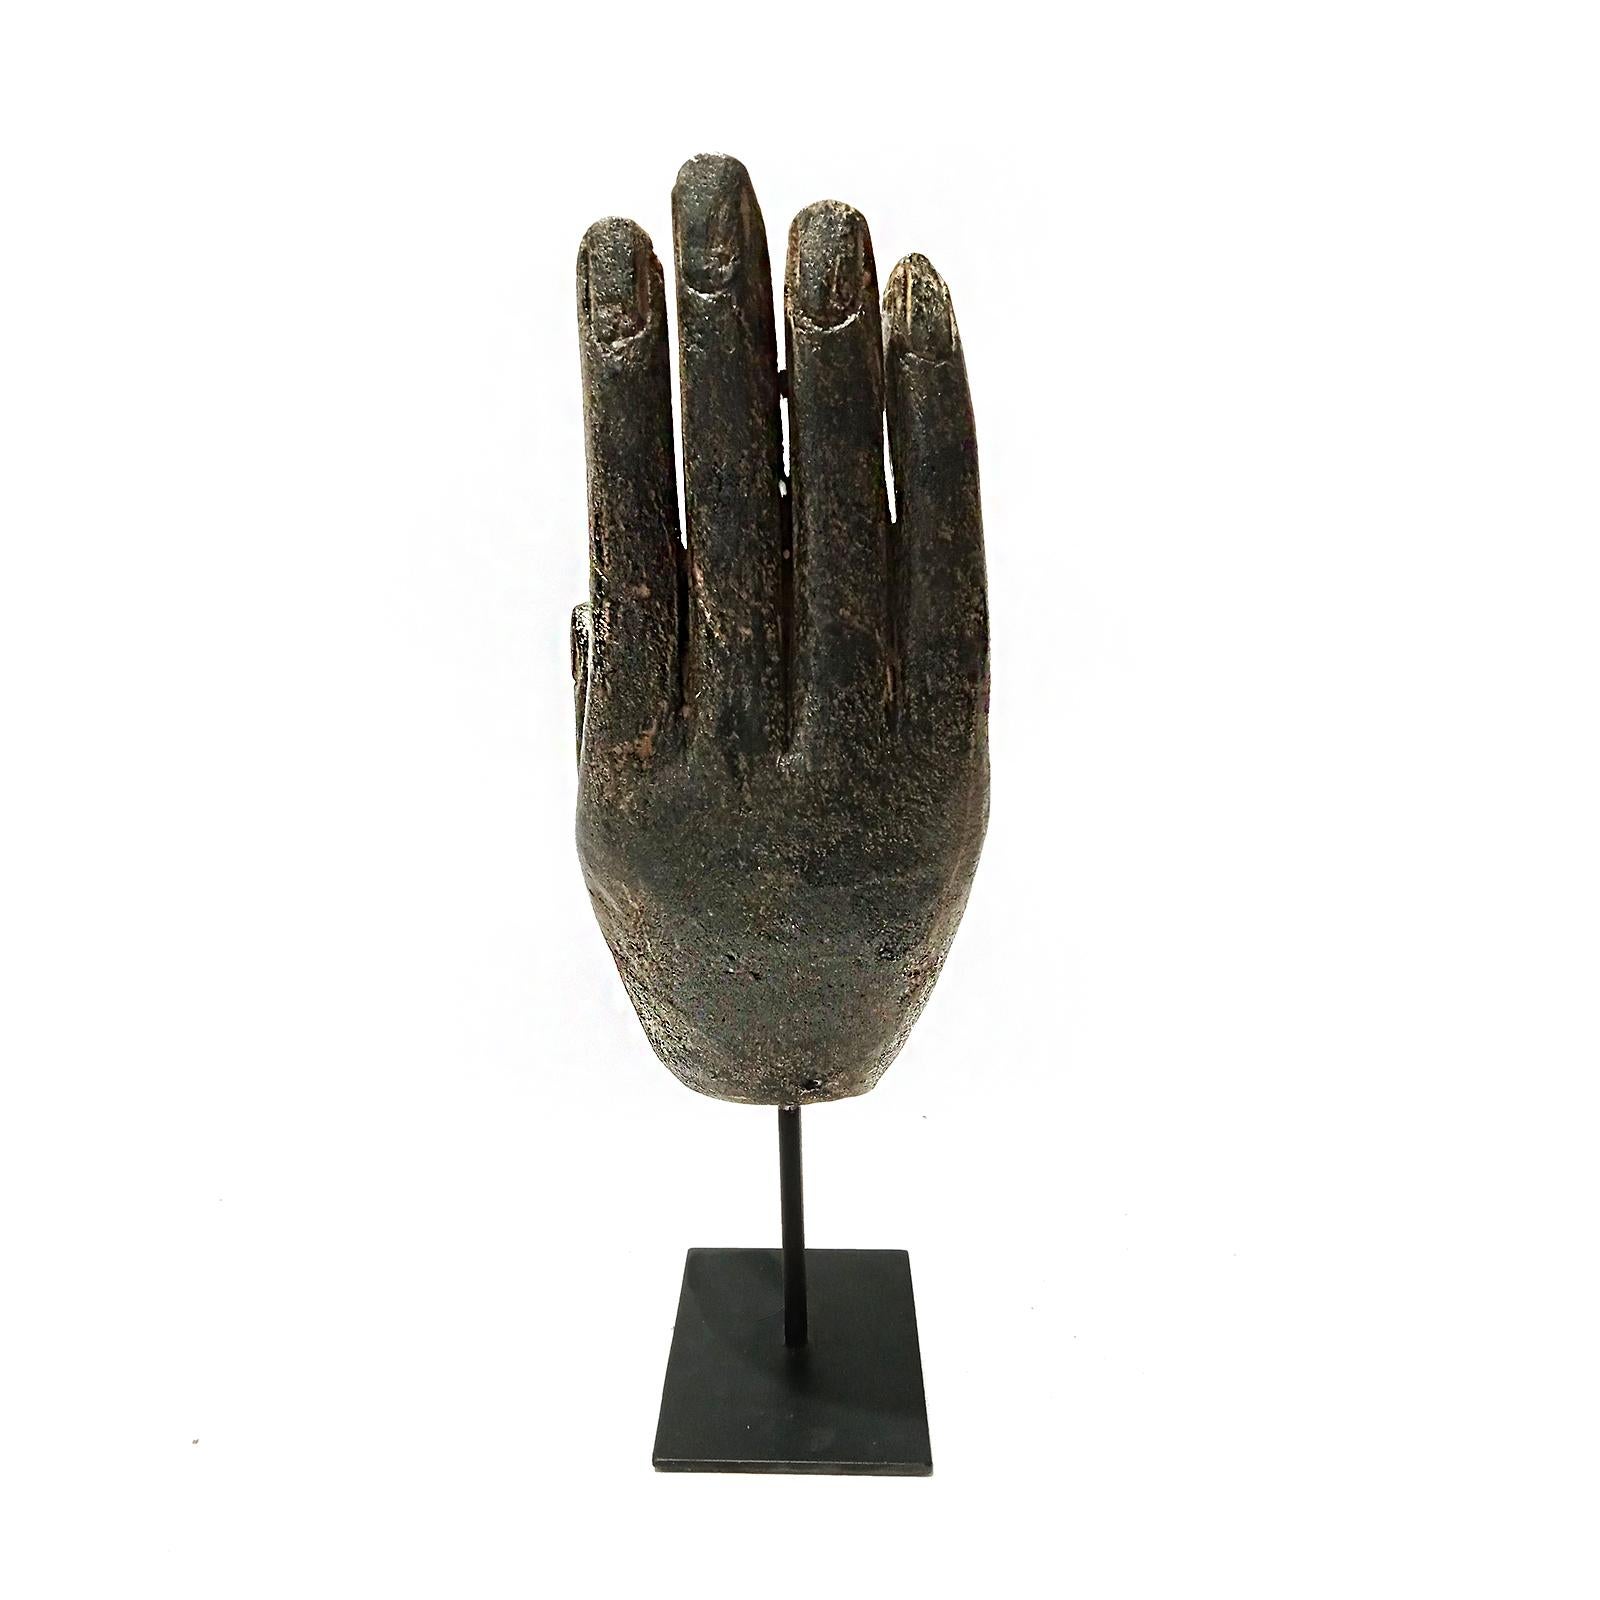 Hand-Carved Three Volcanic Rock Hand Sculptures, Mid 20th Century For Sale